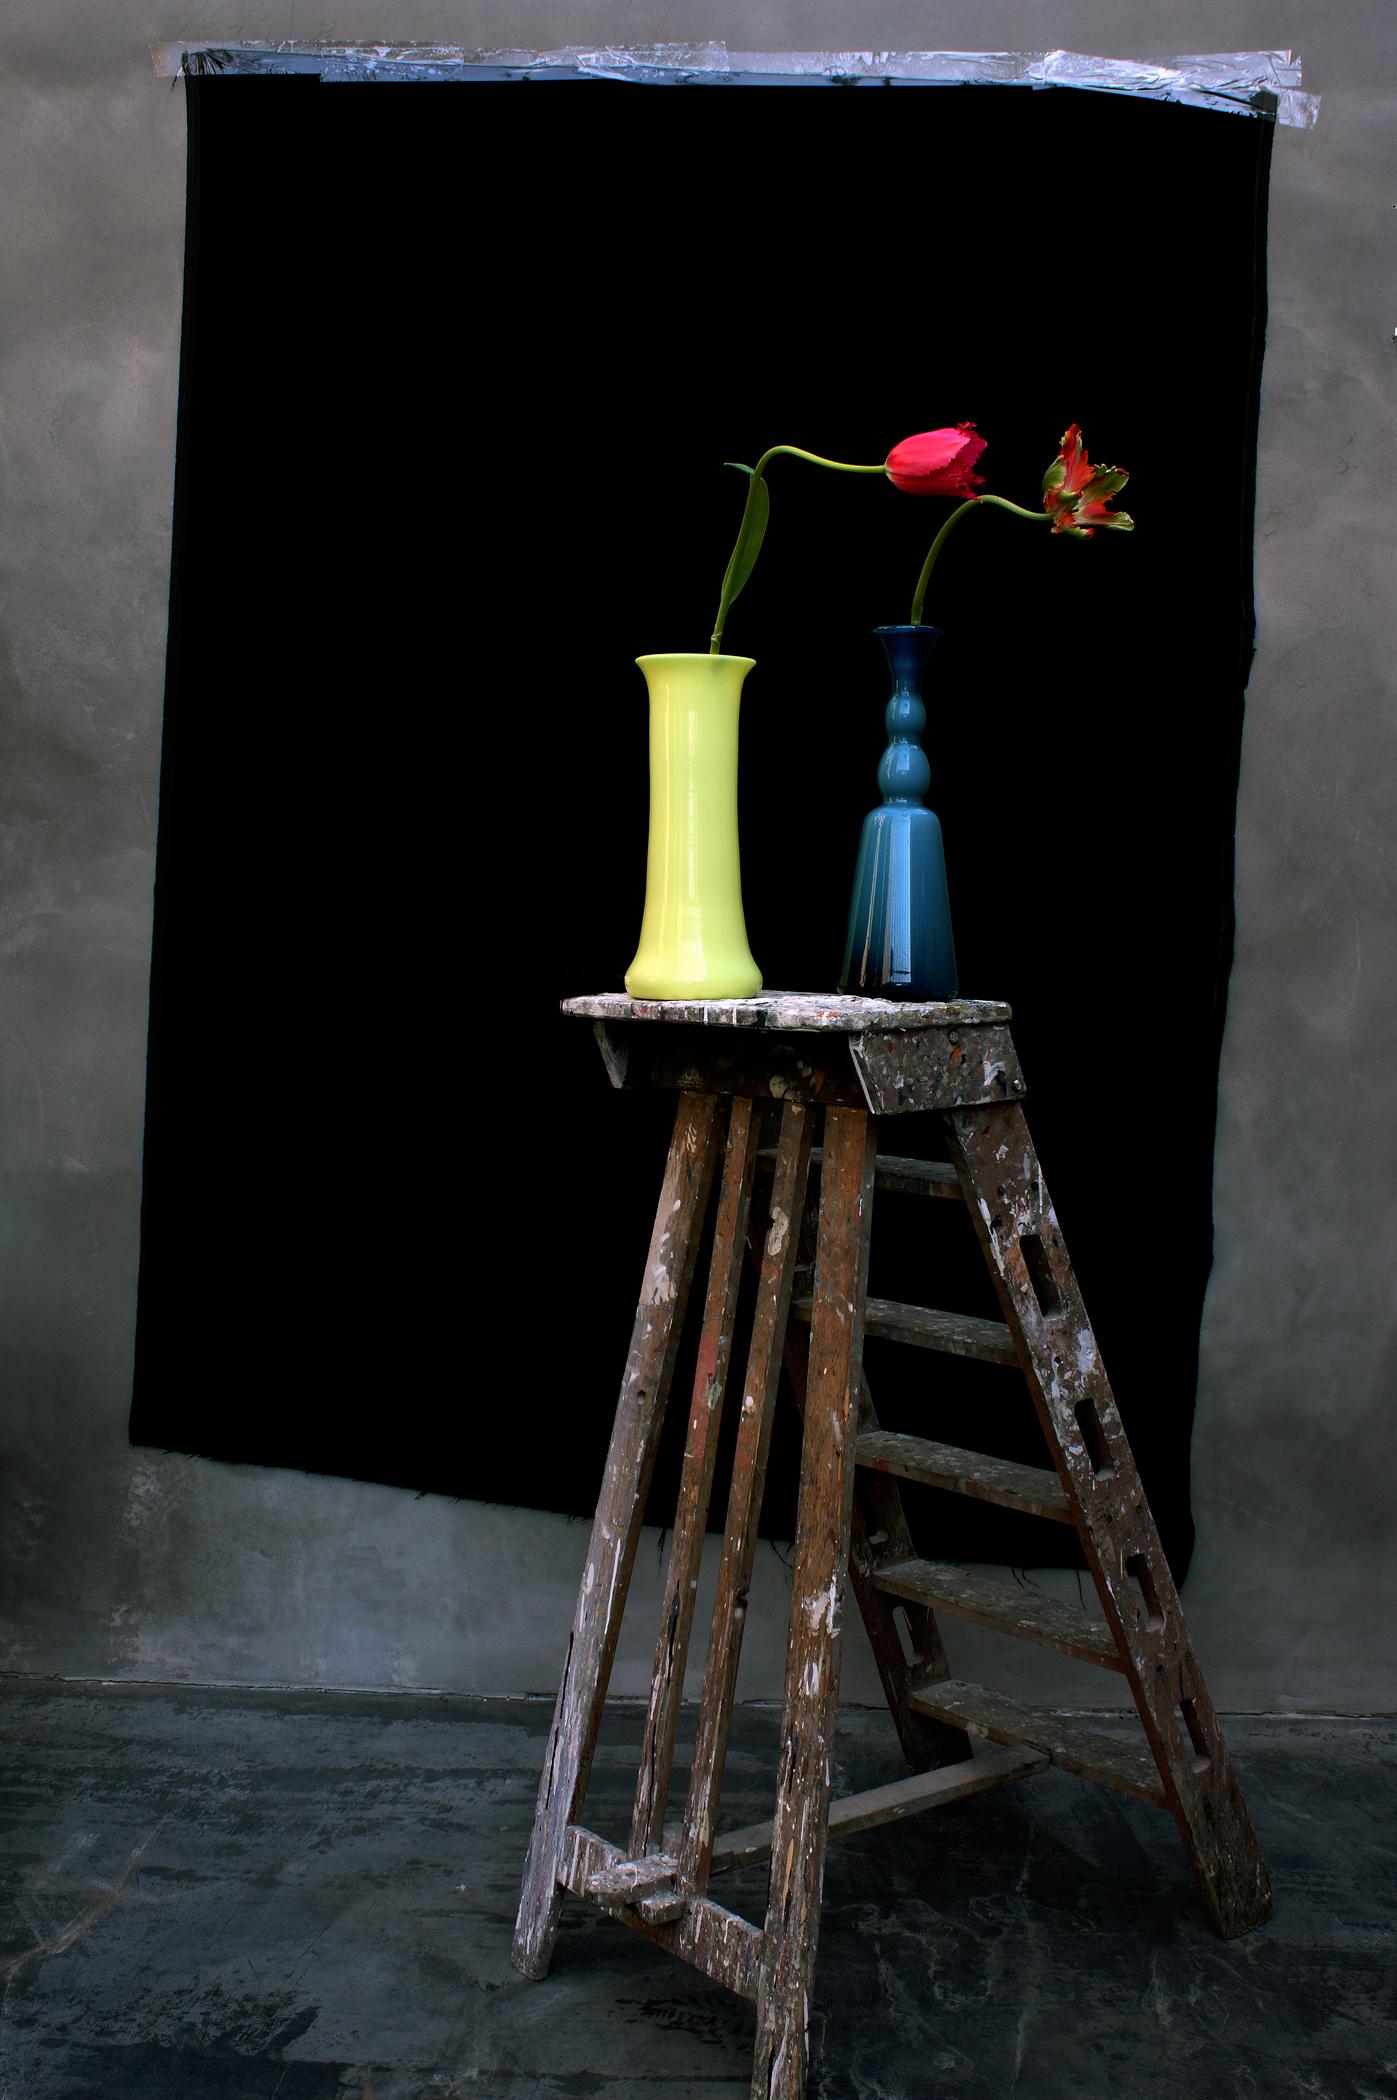 Michael James O’Brien Still-Life Photograph - Still life with Tulips, a Ladder and a Yellow Opalina Vase, Antwerp, Color Photo